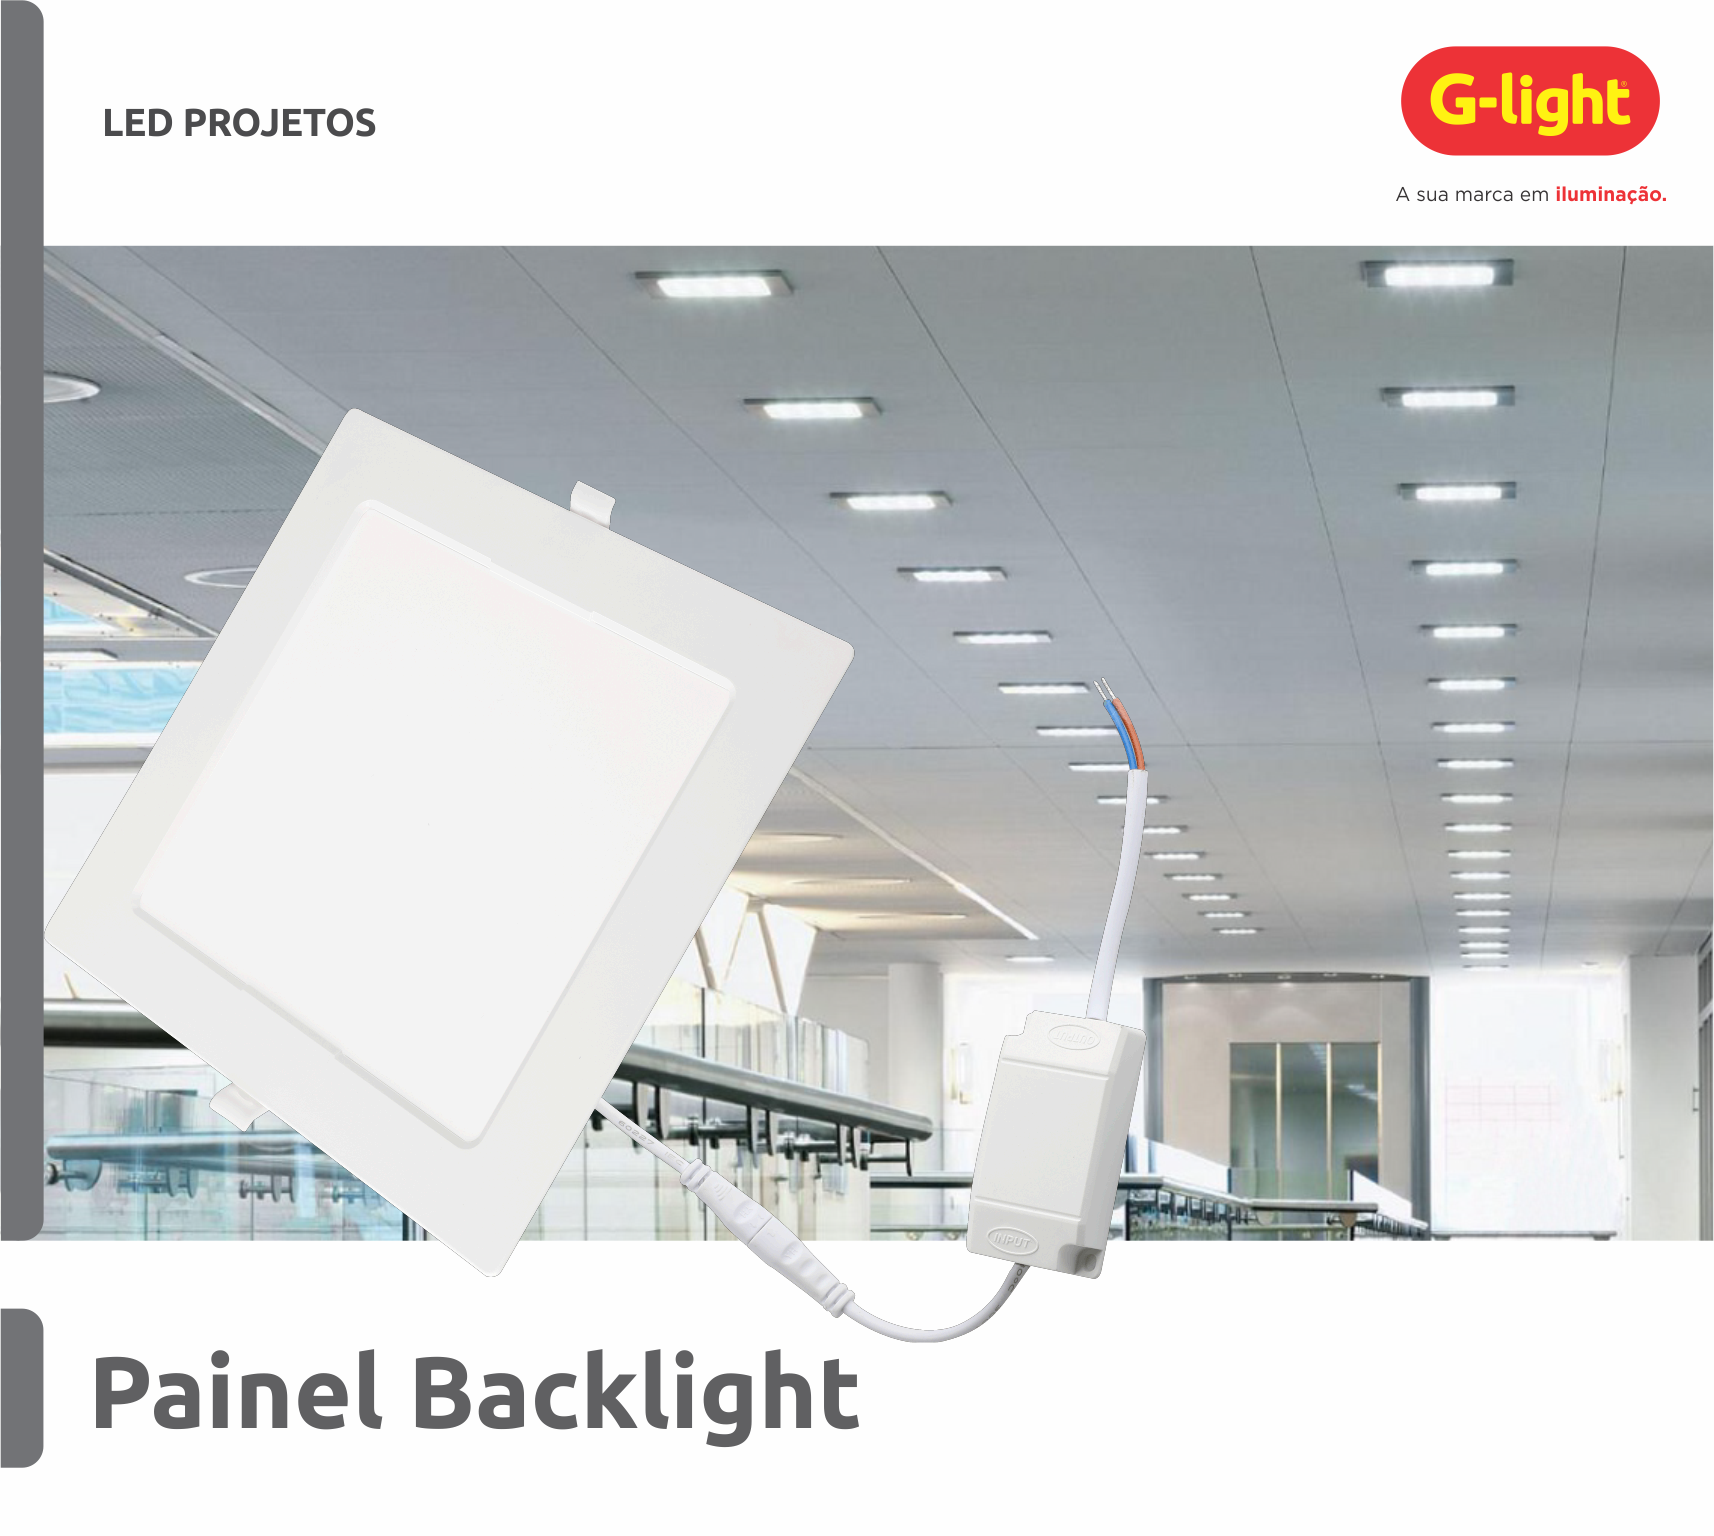 Painel Backlight